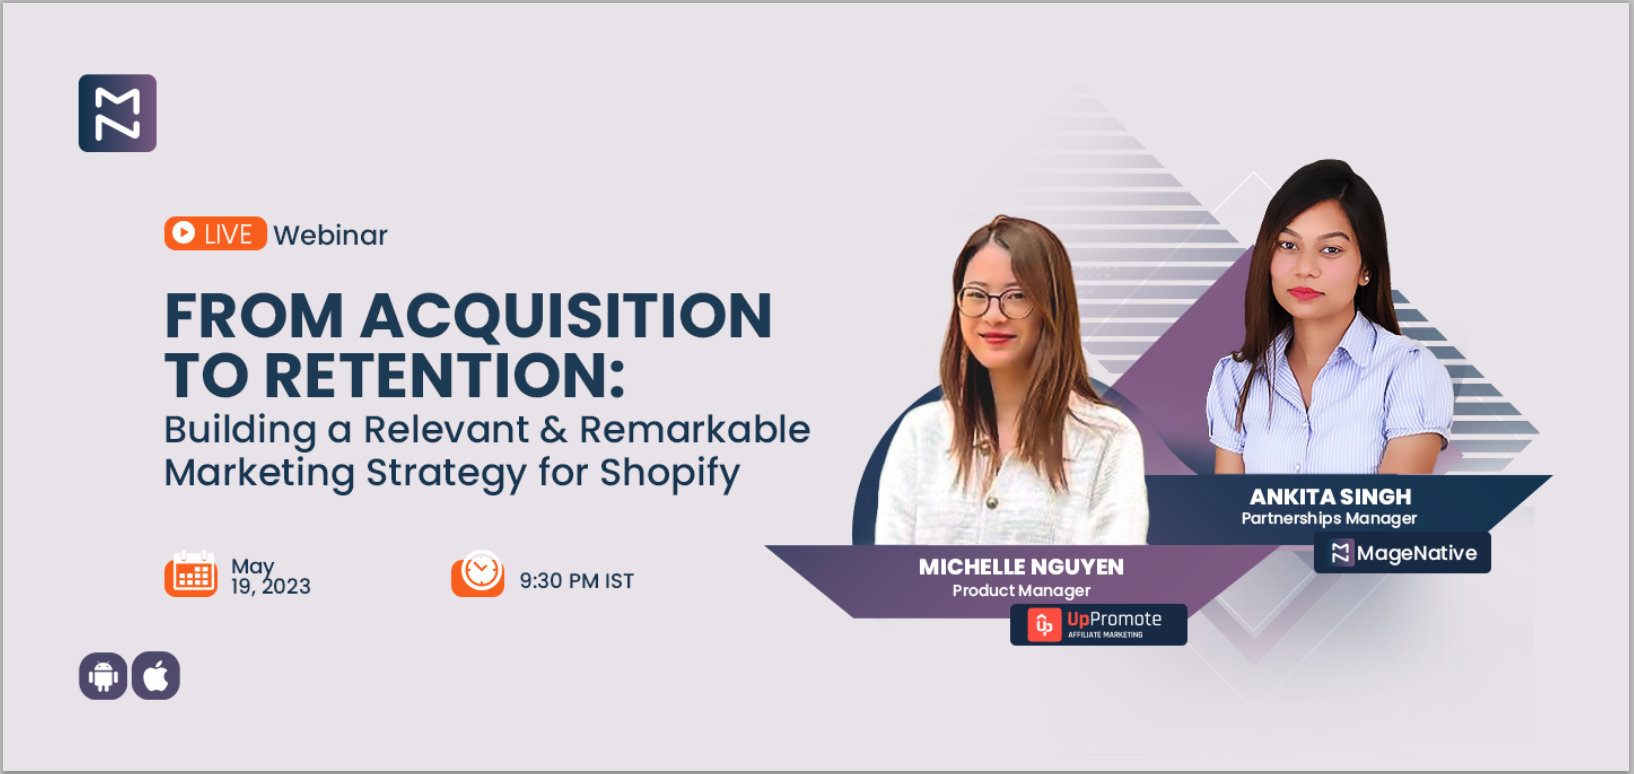 From Acquisition to Retention: Building a Relevant & Remarkable Marketing Strategy for Shopify, Online Event